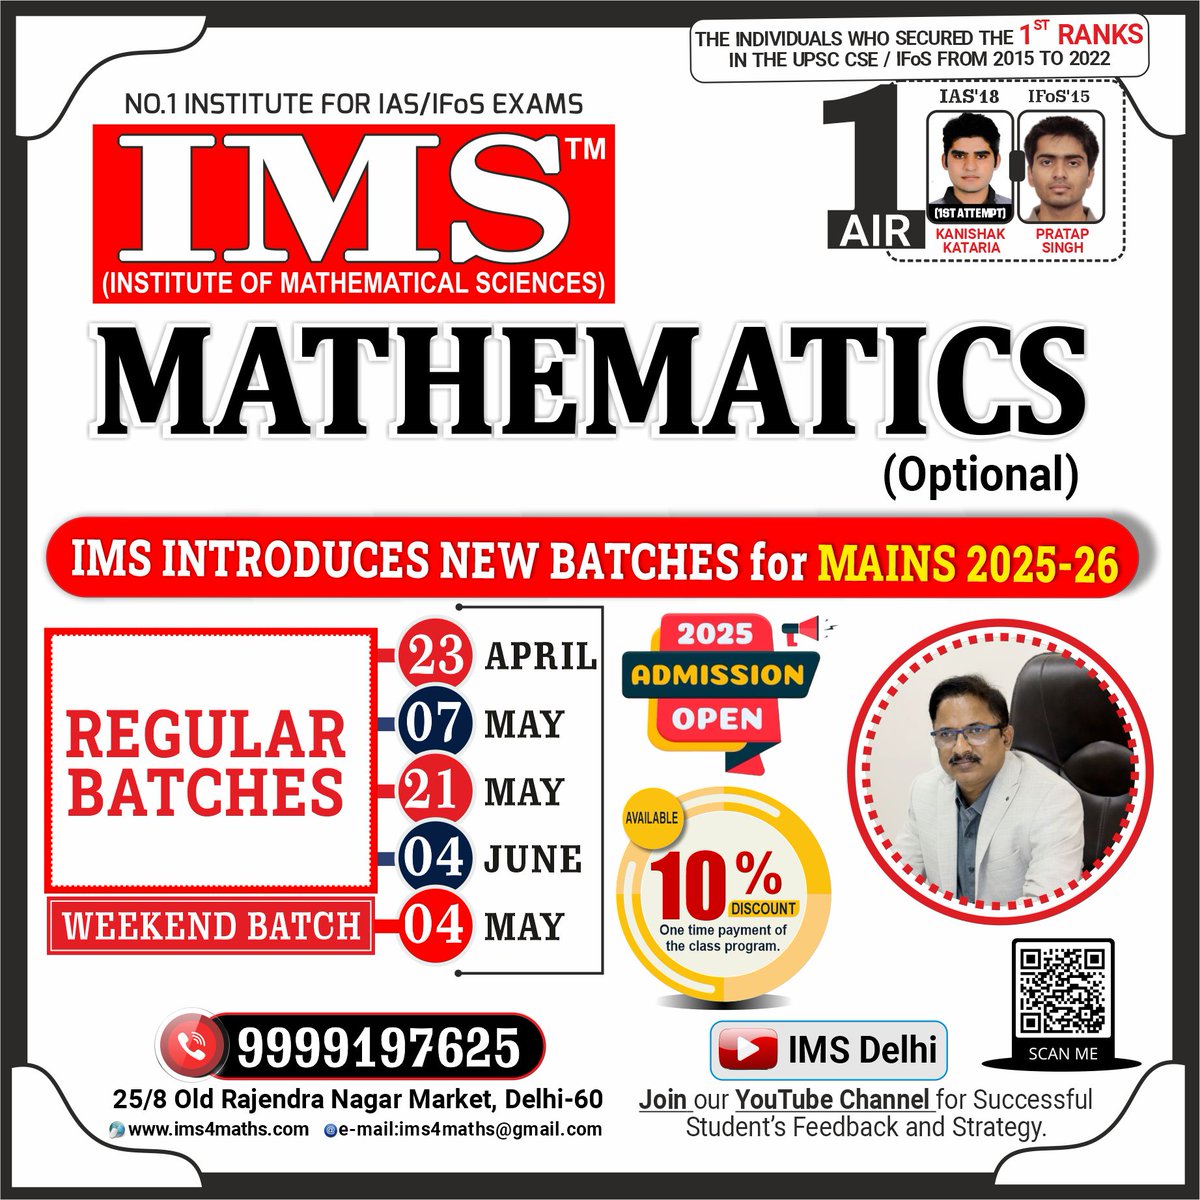 ims4maths.com/classroom-prog…
Join our specialized #Maths Optional Batch designed for UPSC #CivilServices #IAS/#IFoS Examination preparation!
#IMS is the top #coachingInstitute for #MathsOptional in Delhi